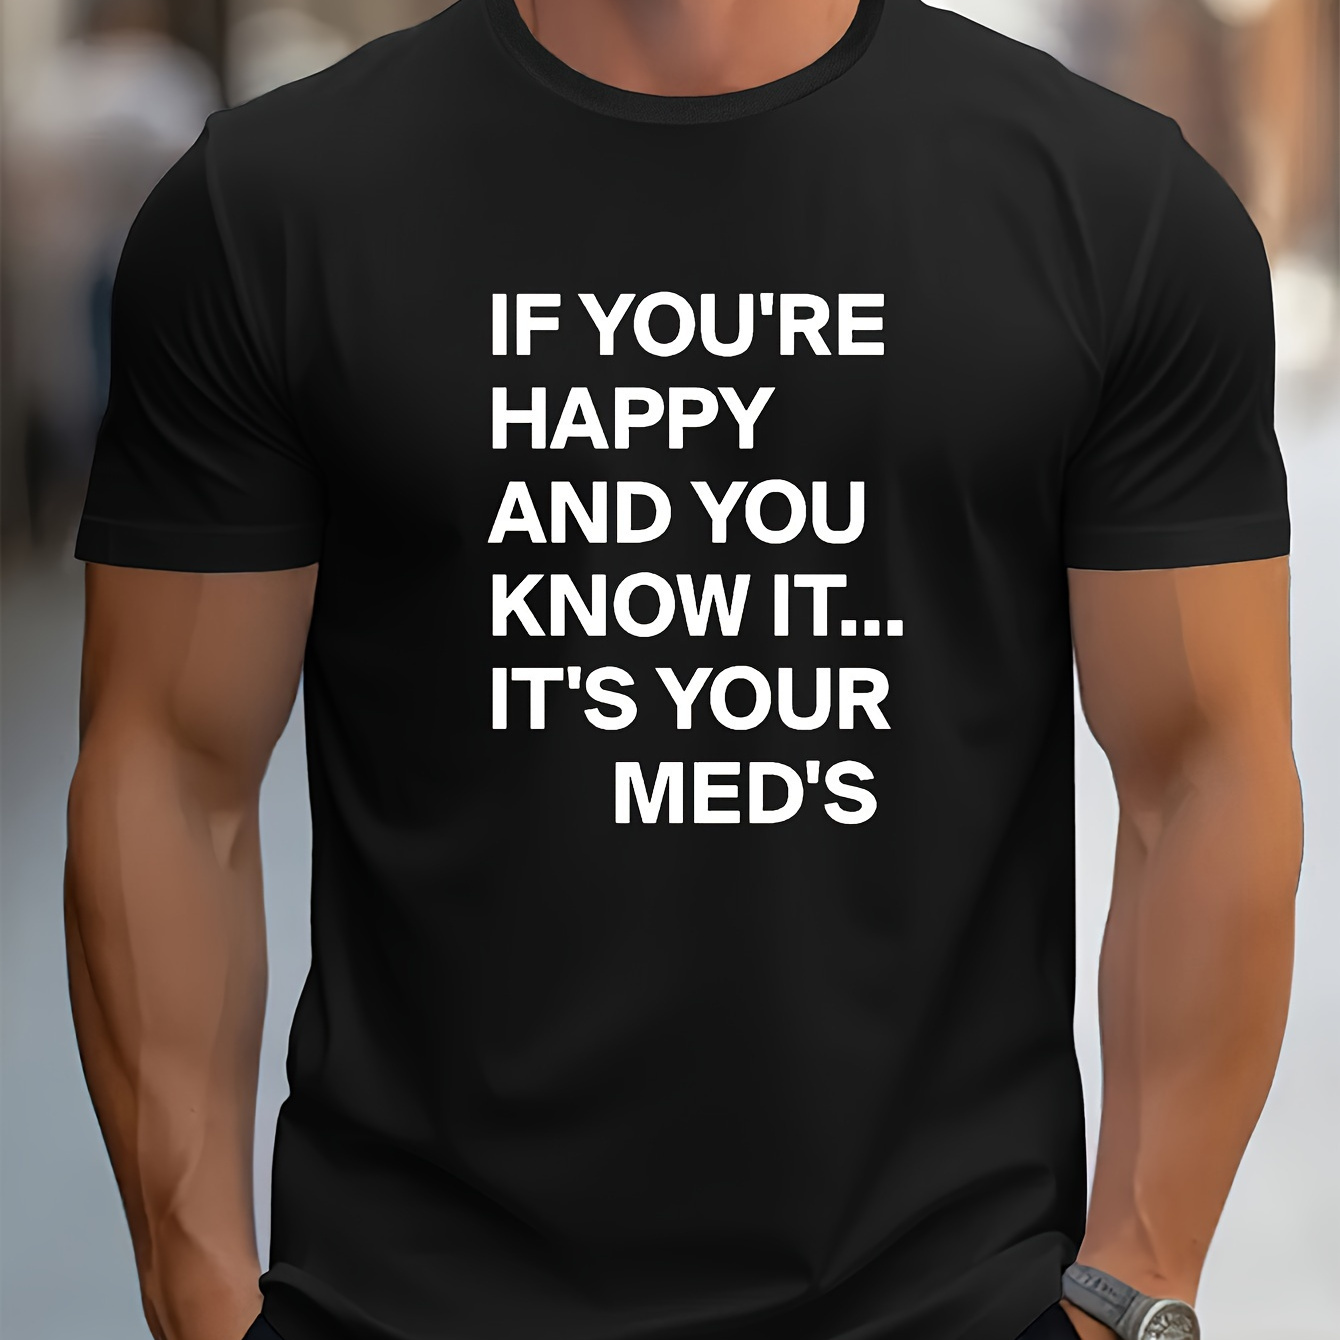 

If You're Happy And You Know It It's Your Med's " Creative Print Stylish T-shirt For Men, Crew Neck Short Sleeve, Casual Tee, Versatile Top For Spring And Summer, Trendy Streetwear Fashion